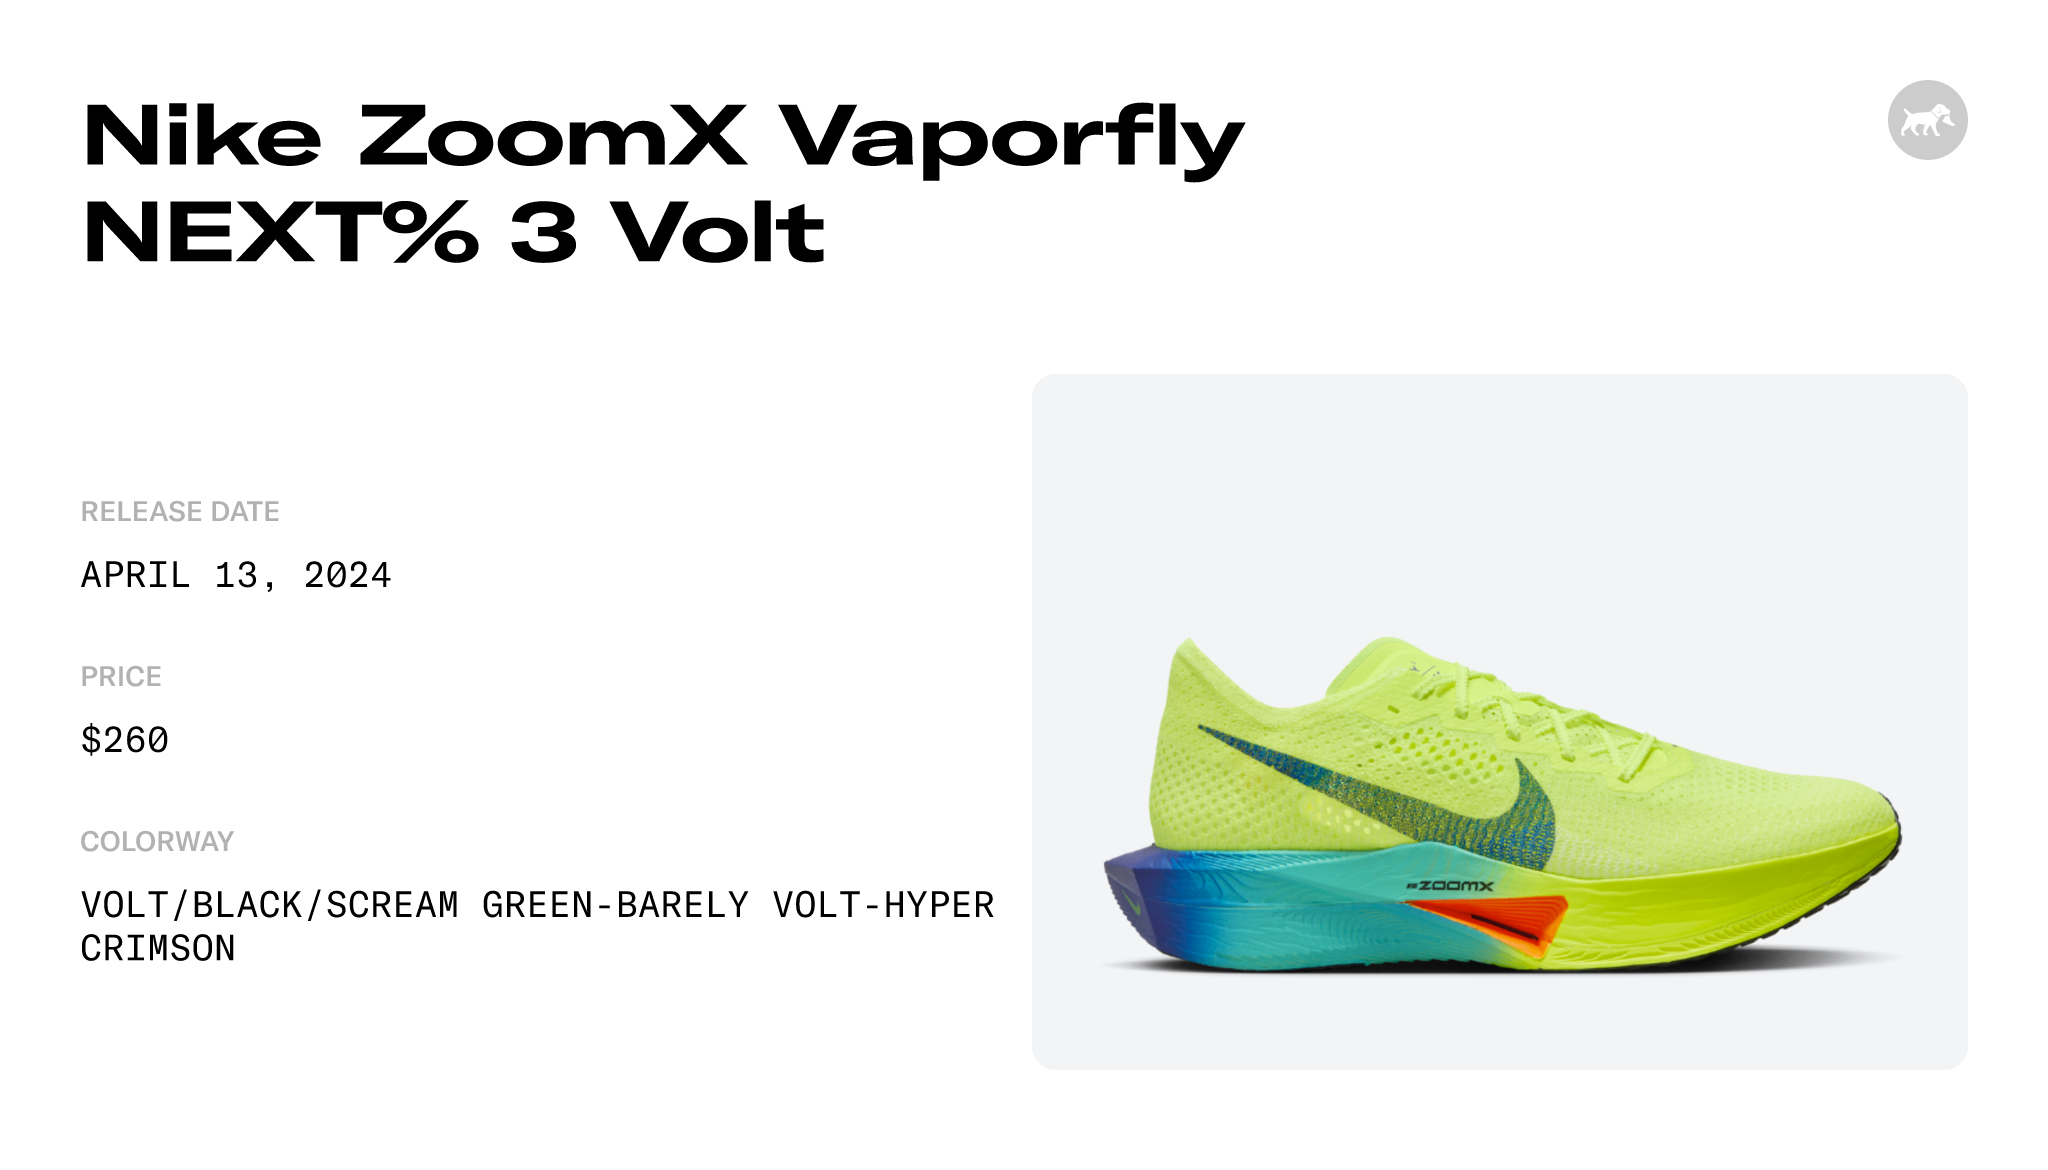 Nike ZoomX Vaporfly NEXT% 3 Volt - DV4129-700 Raffles and Release Date